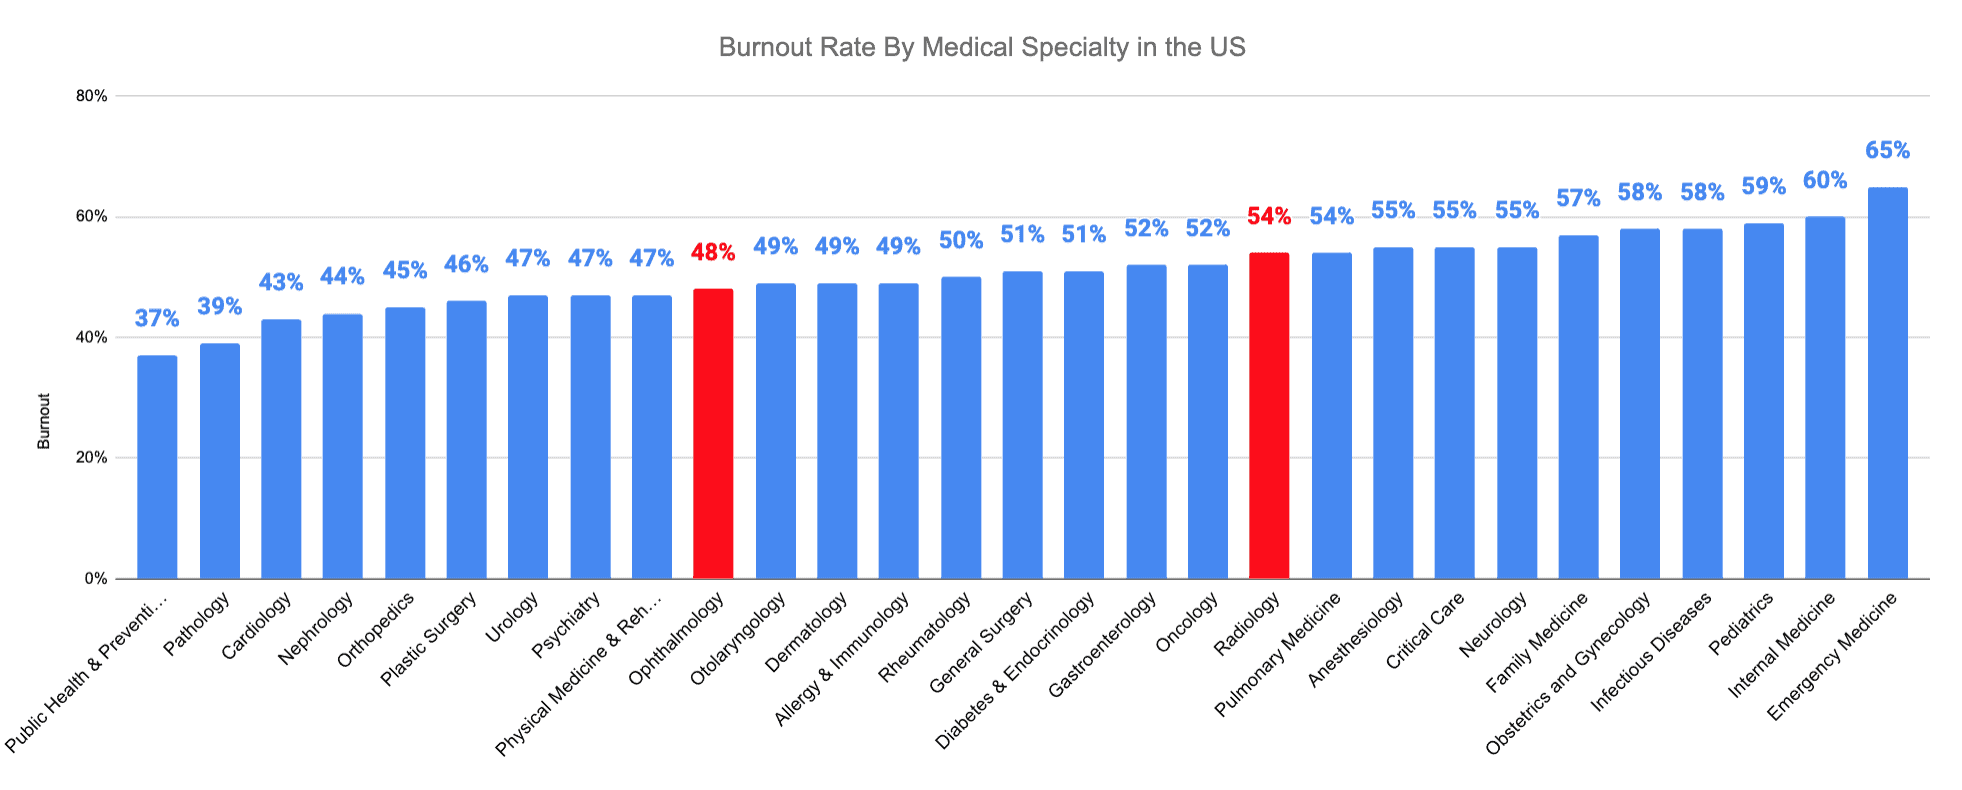 Radiology vs. Ophthalmology Burnout Rate By Medical Specialty in the US